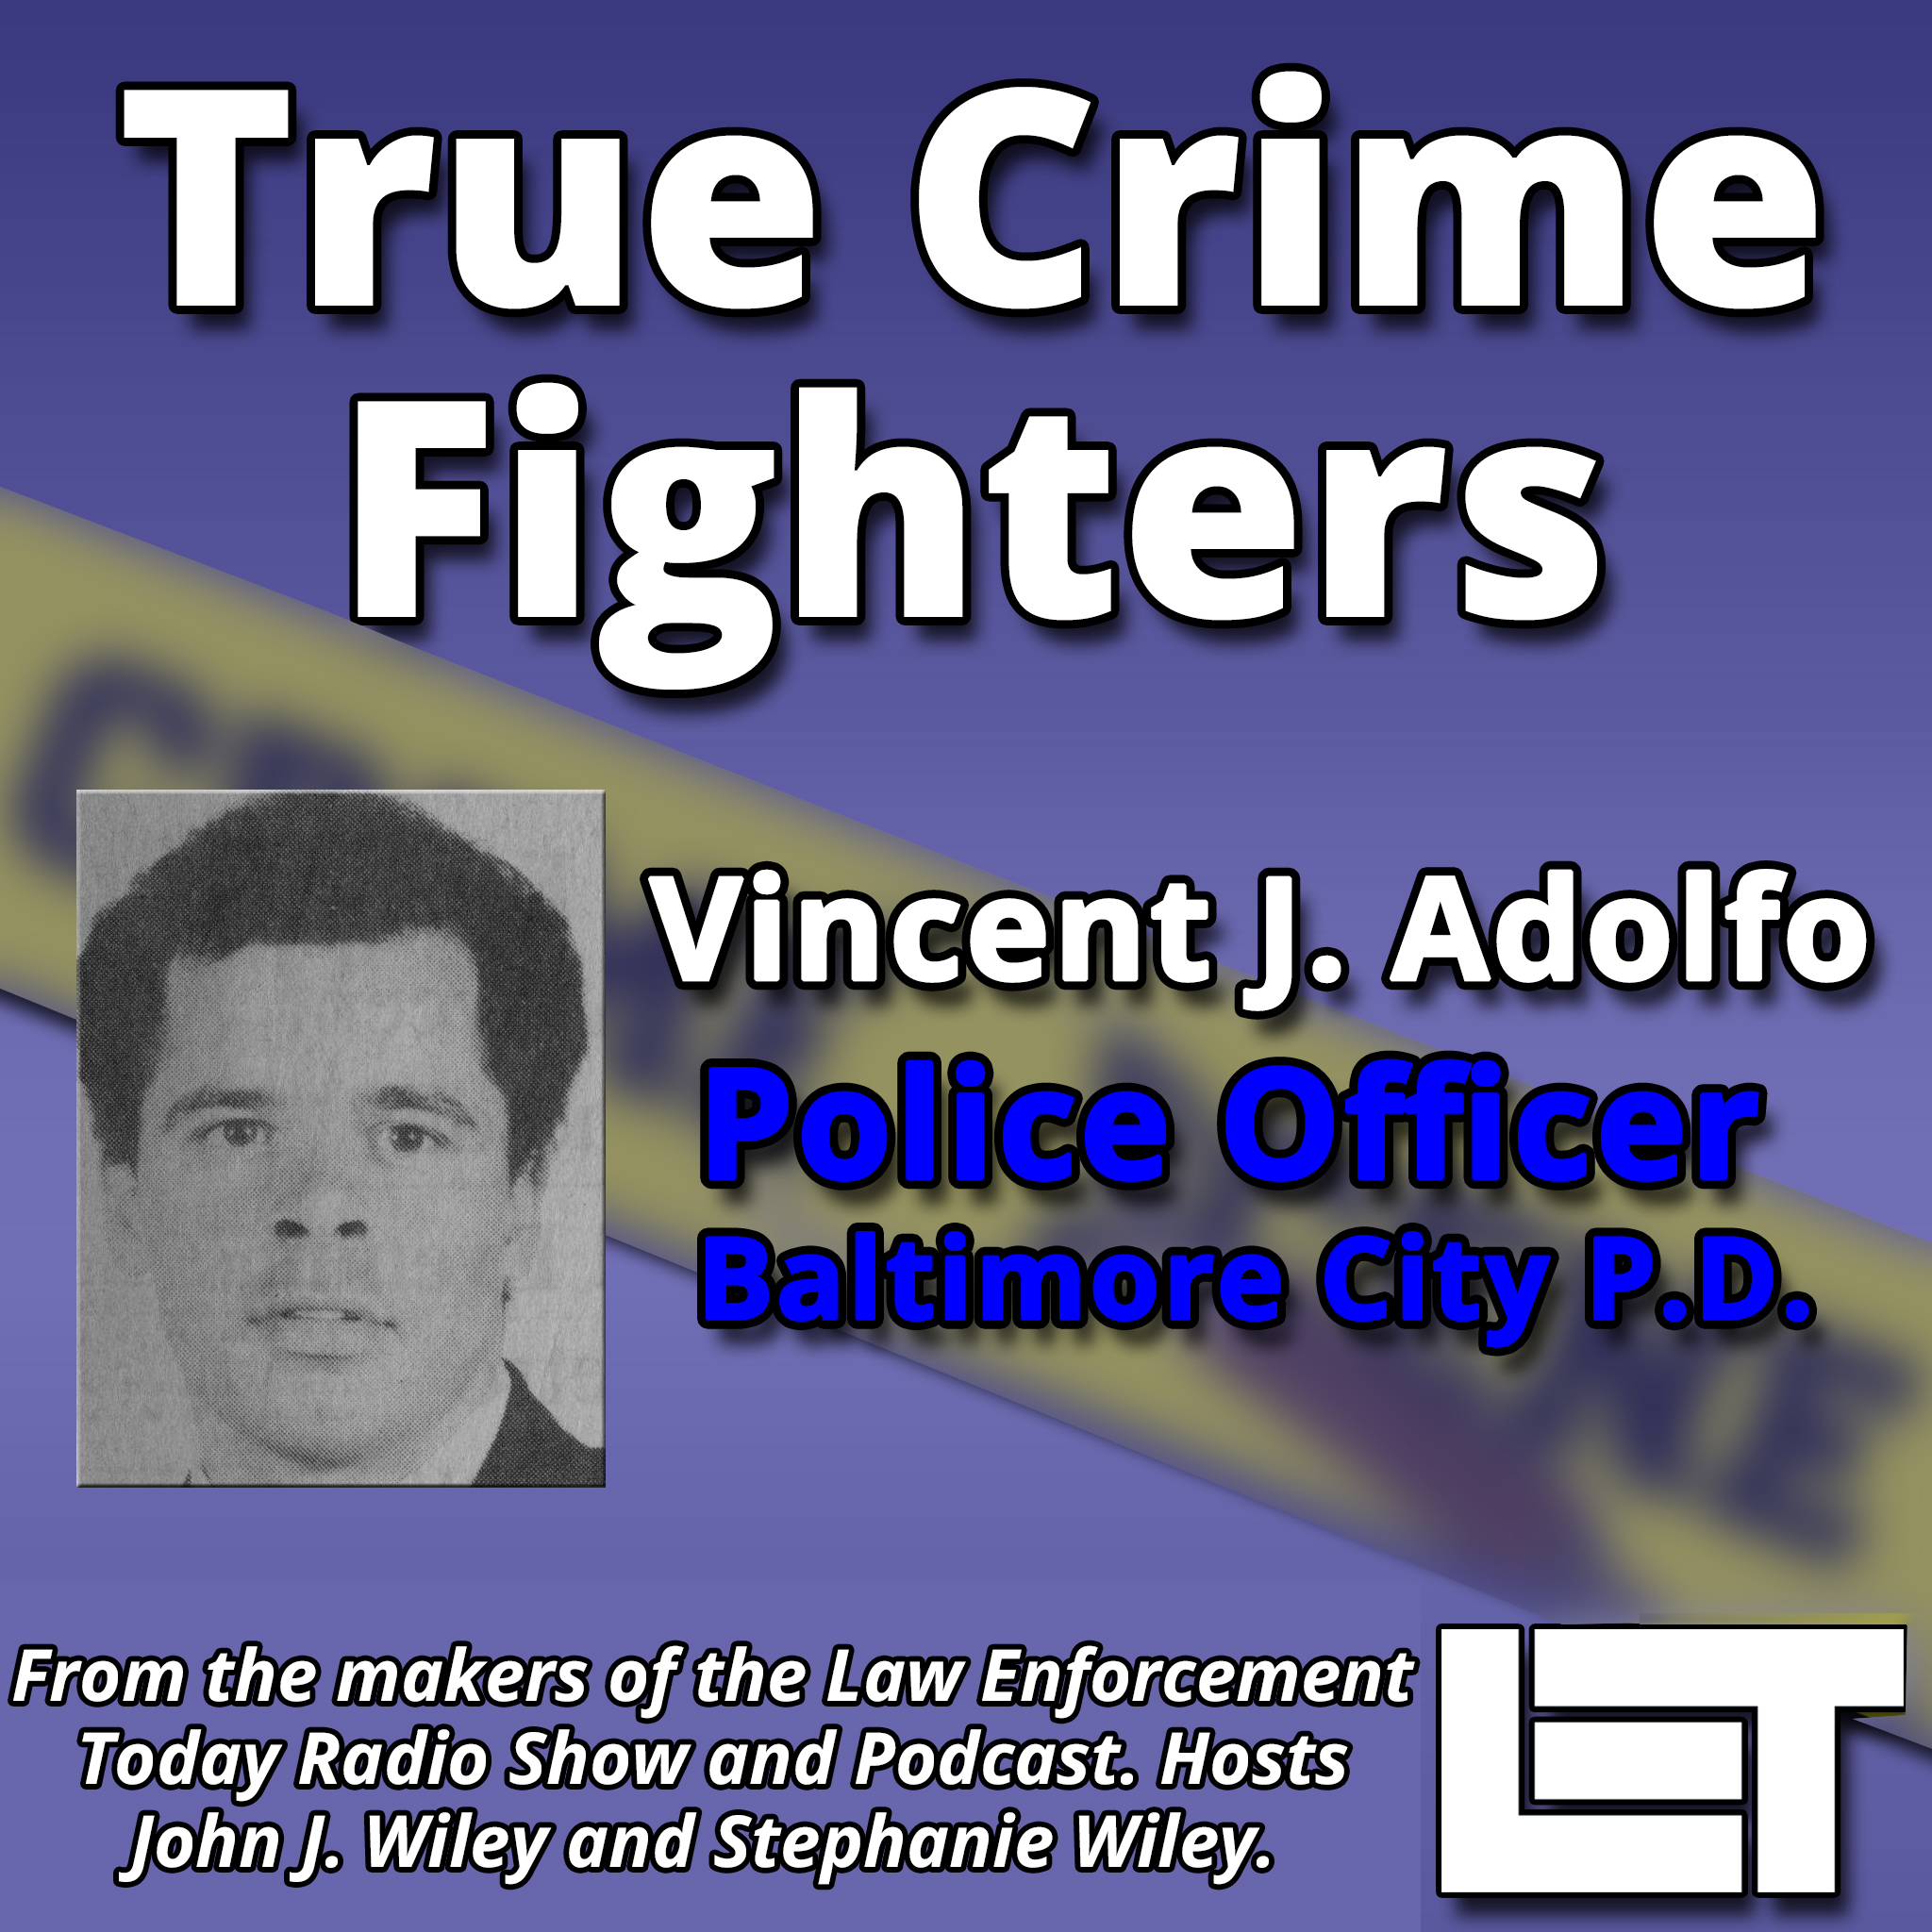 Police Officer Vincent Adolfo, his killer should have been behind bars instead of the streets.